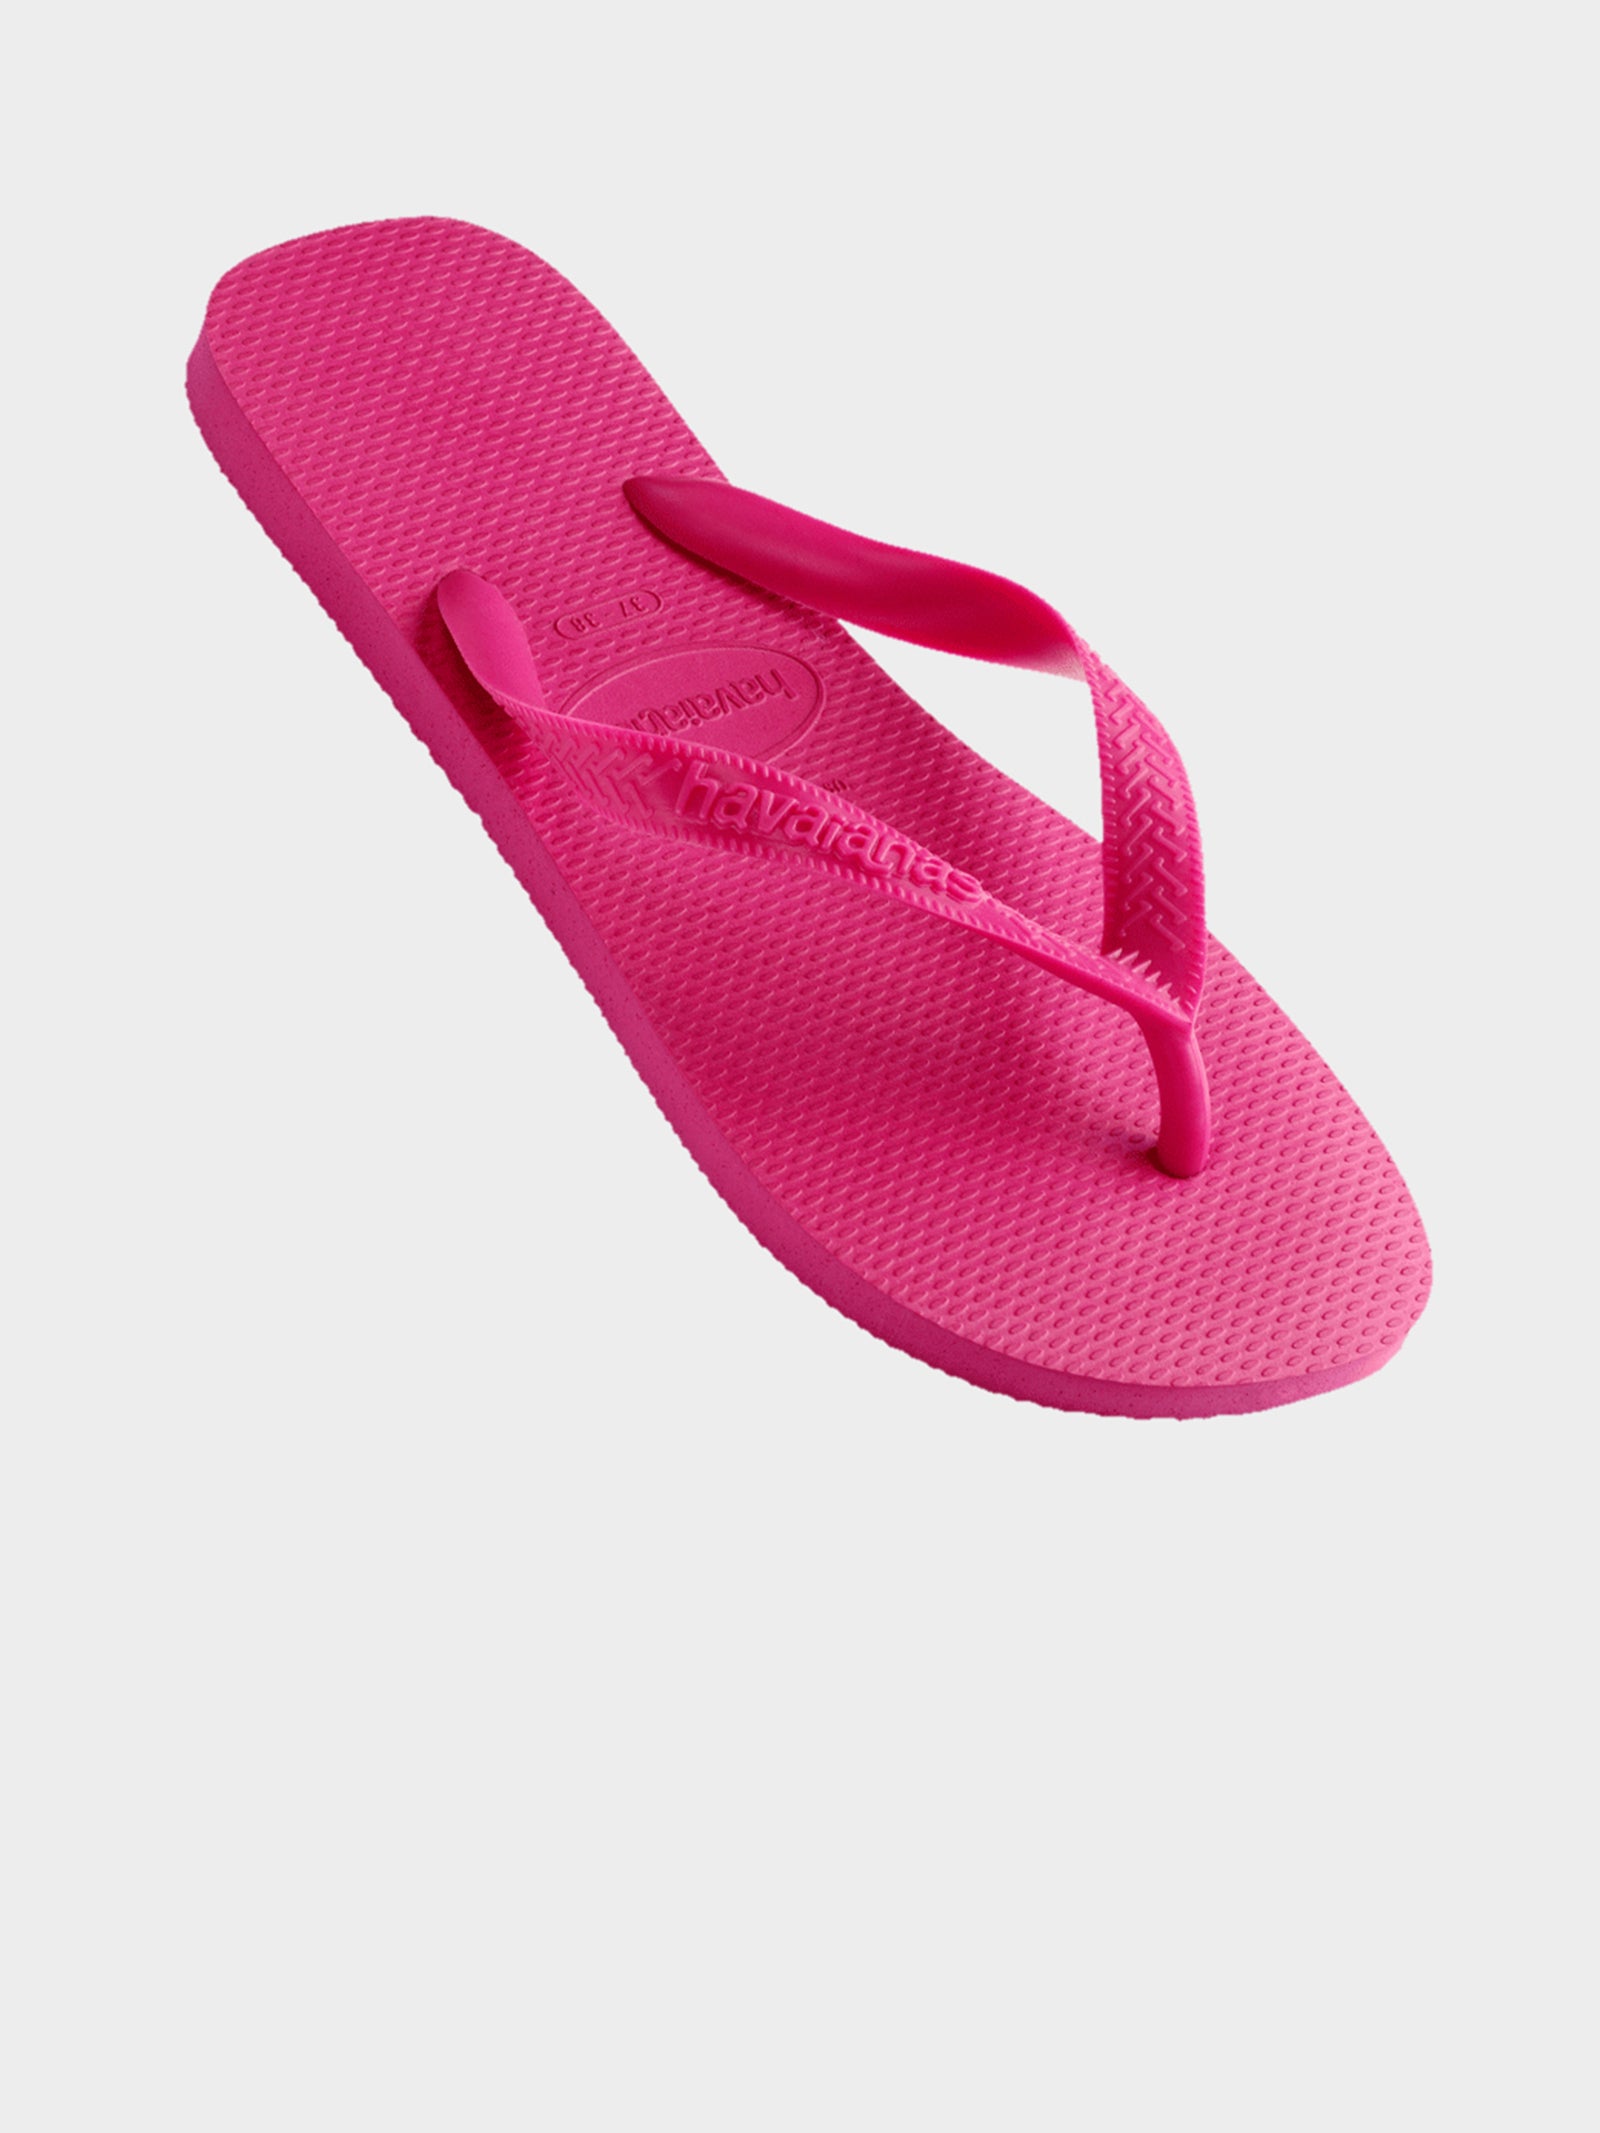 Unisex Top Thongs in Pink Electric